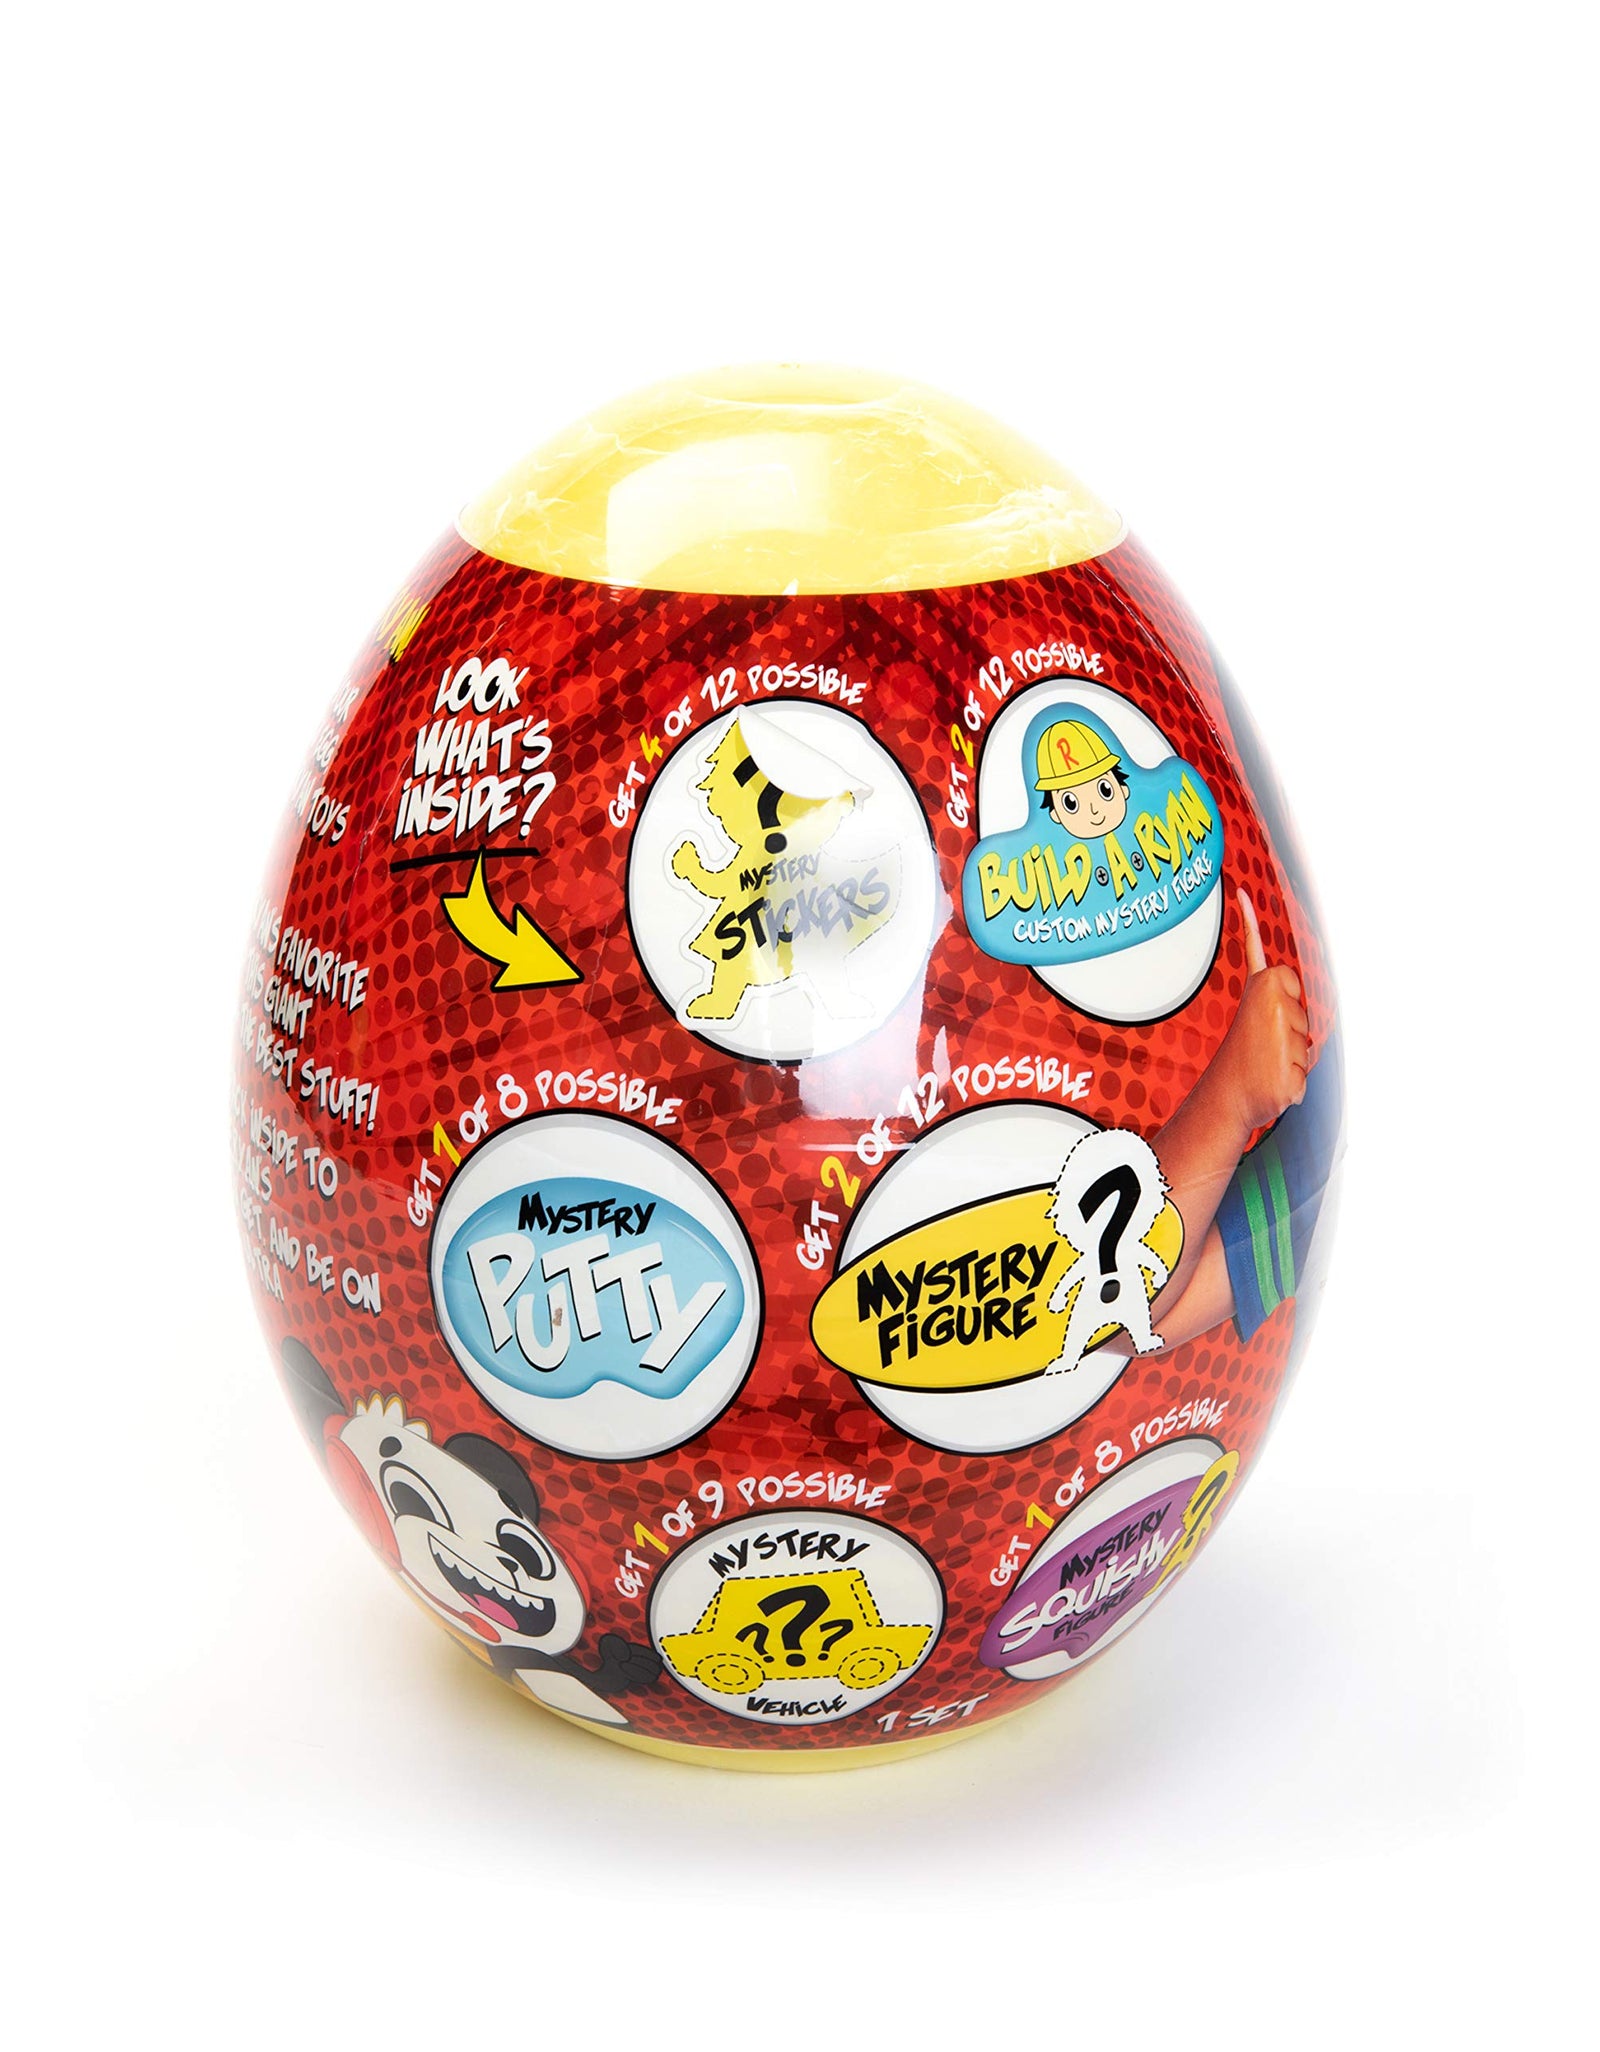 RYAN'S WORLD Giant Mystery Egg Series 5, Filled with Surprises, 1 of 3 Color Variety New Vehicles, 2 Ultra-Rare Figures, 2 Build-a-Ryan Figures, Special Putty, 1 Squishy and Stickers, Toy for Kids